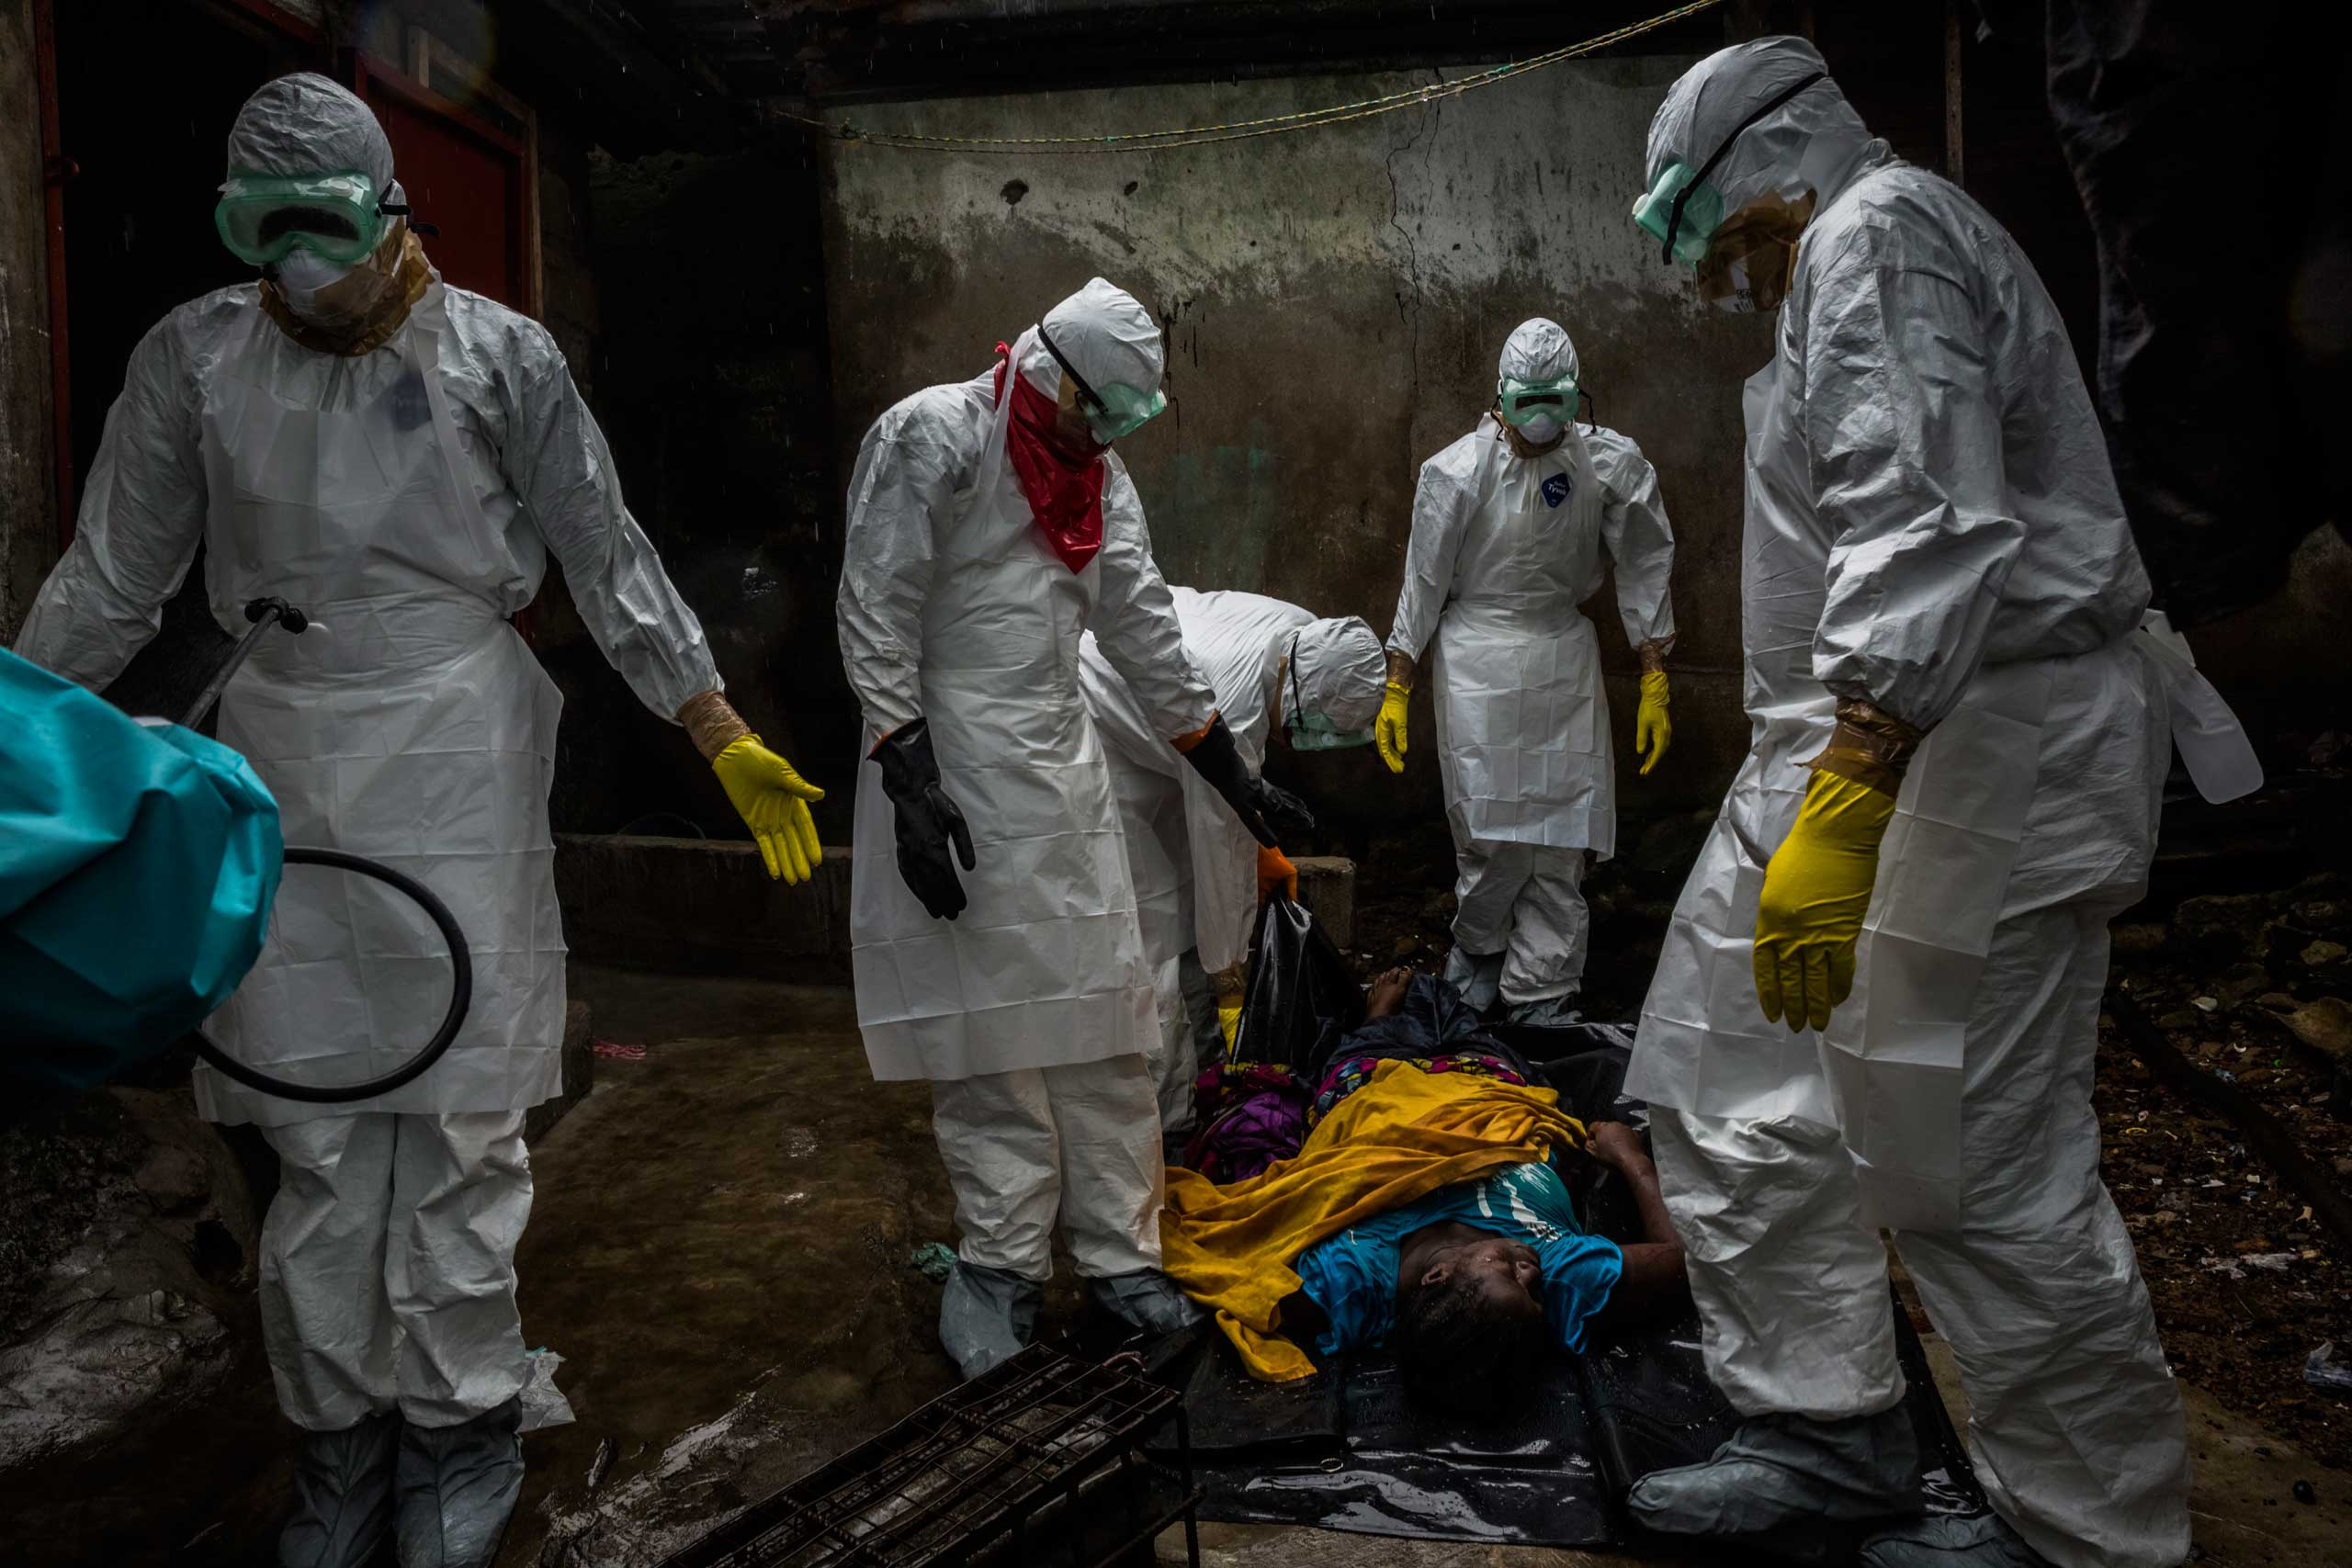 Members of a Liberian Red Cross burial team, under contract from the Liberian Ministry of Health, remove the body of suspected Ebola victim Lorpu David, 30, on Sept. 18, 2014, in the Gurley street community in central Monrovia, Liberia.